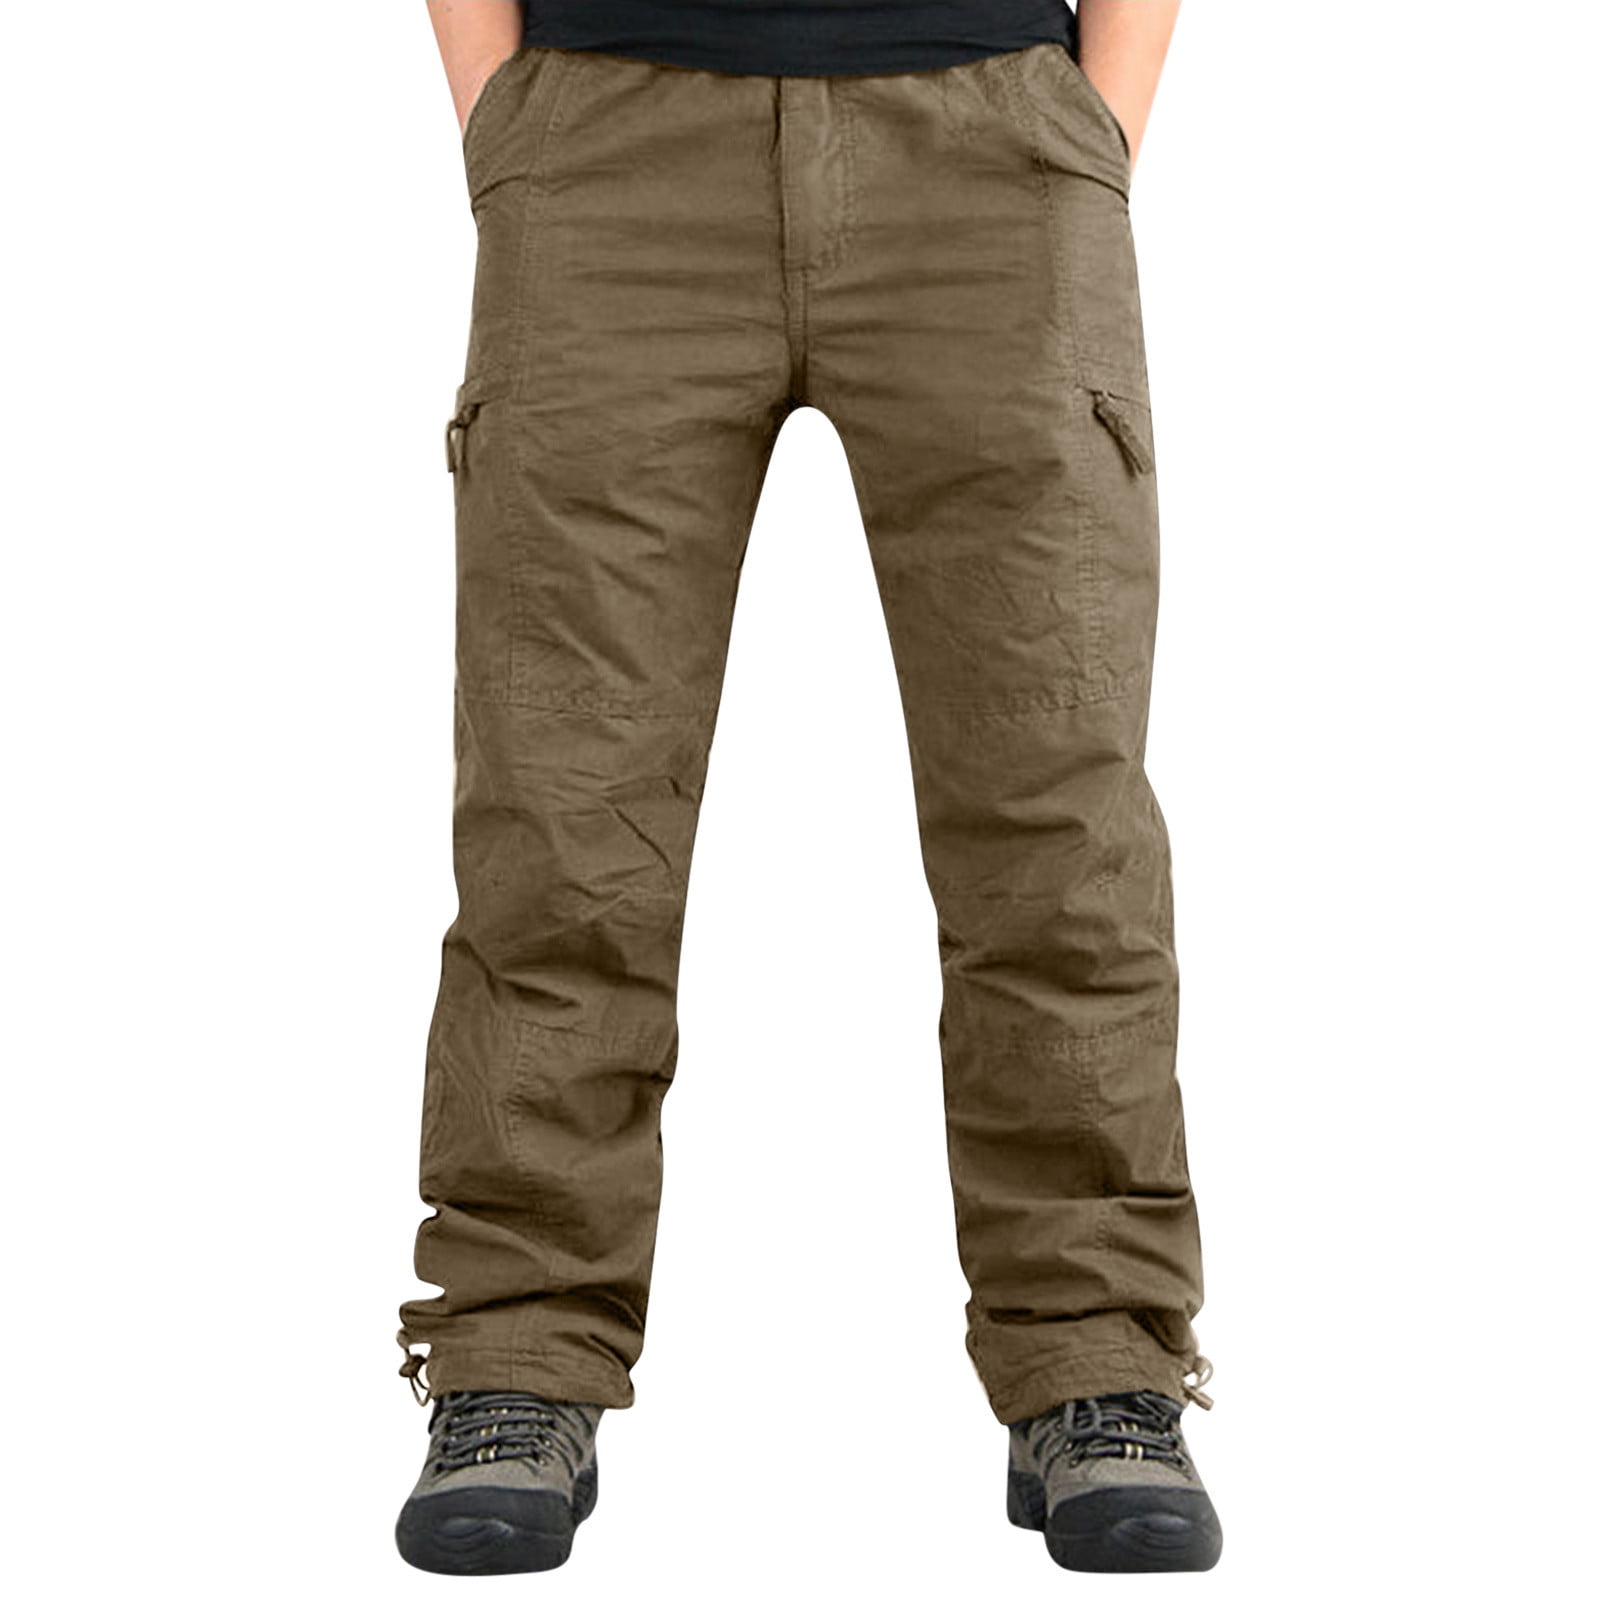 Kayannuo Cargo Pants for Men Deal Men Solid Casual Multiple Pockets Outdoor  Straight Type Fitness Pants Cargo Pants Trousers Army Green